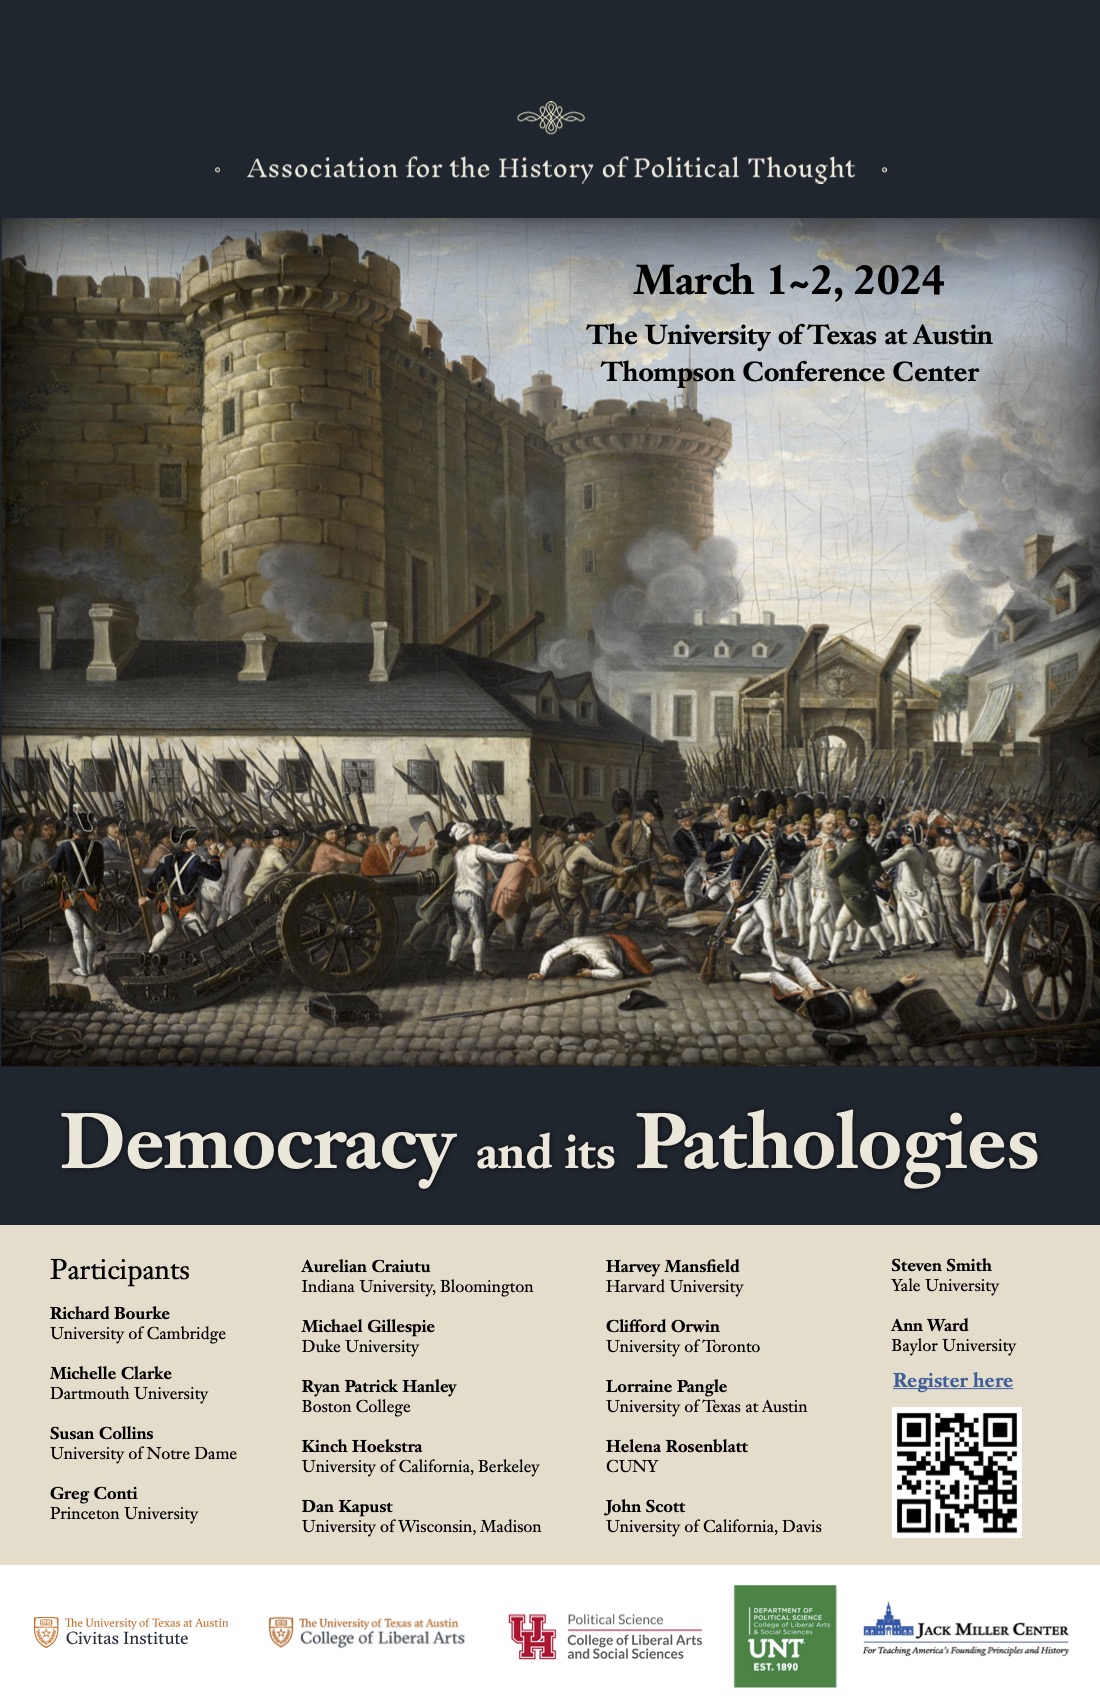 The Association for the History of Political Thought Conference battle image